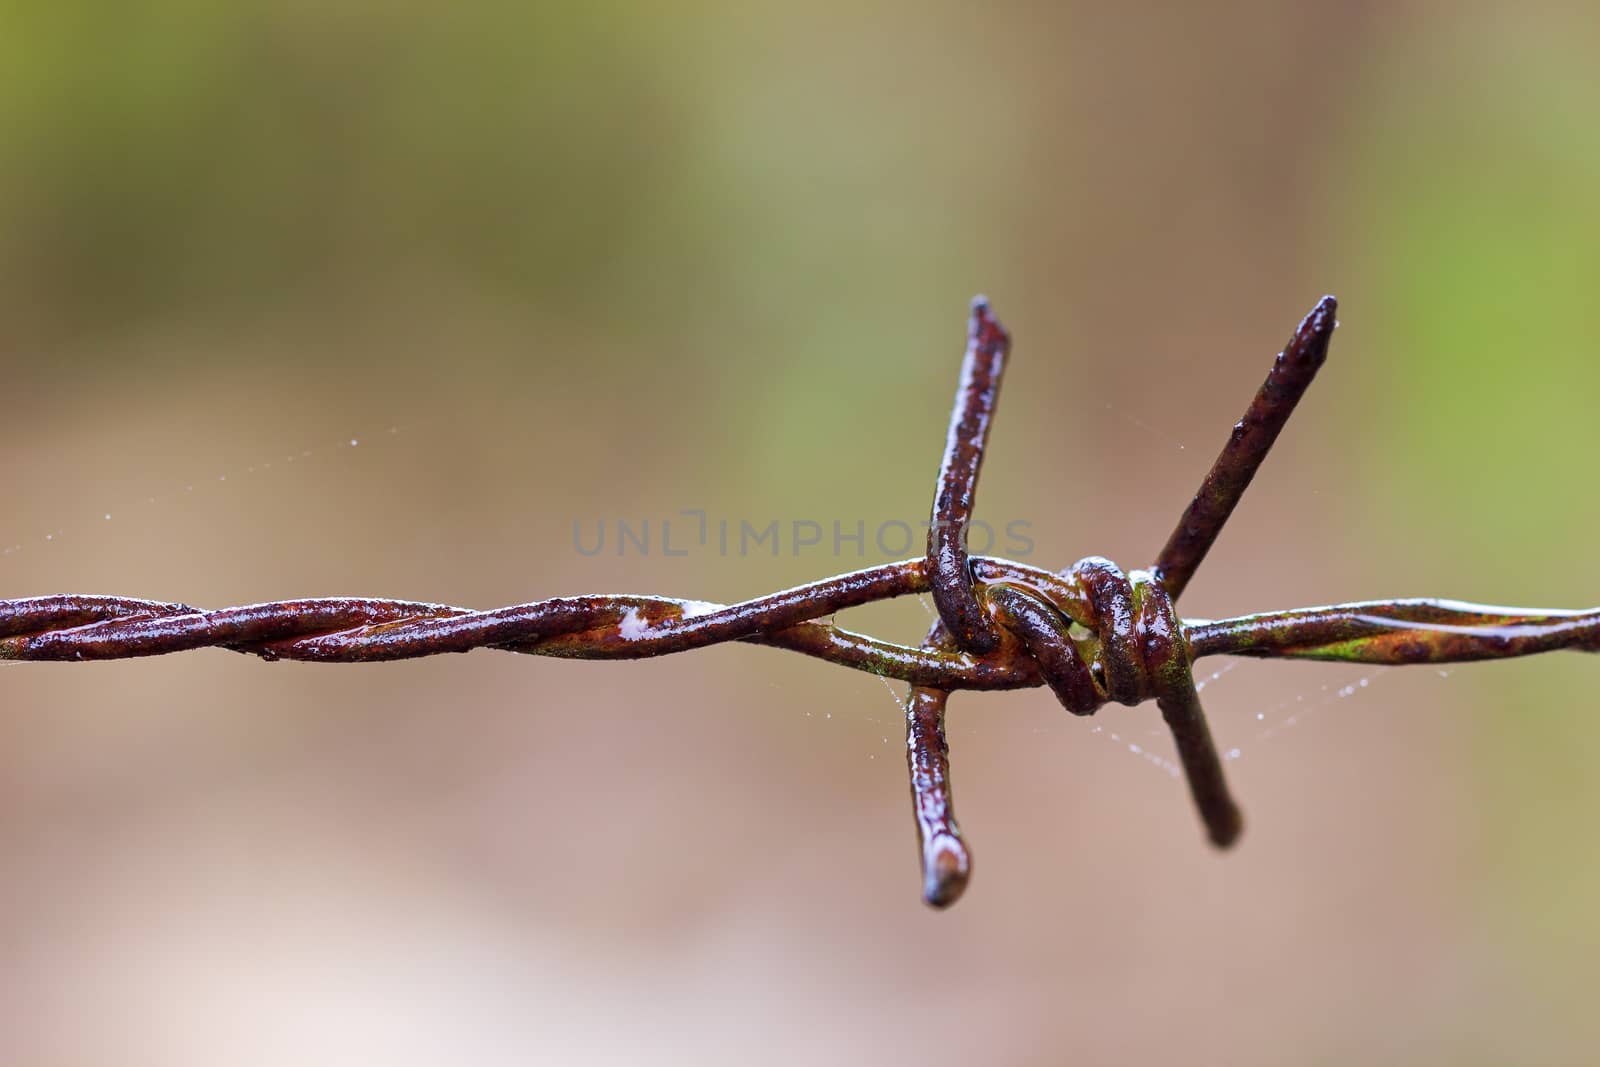 Old rusty Barbed wire fence and spider web were wet with rain.